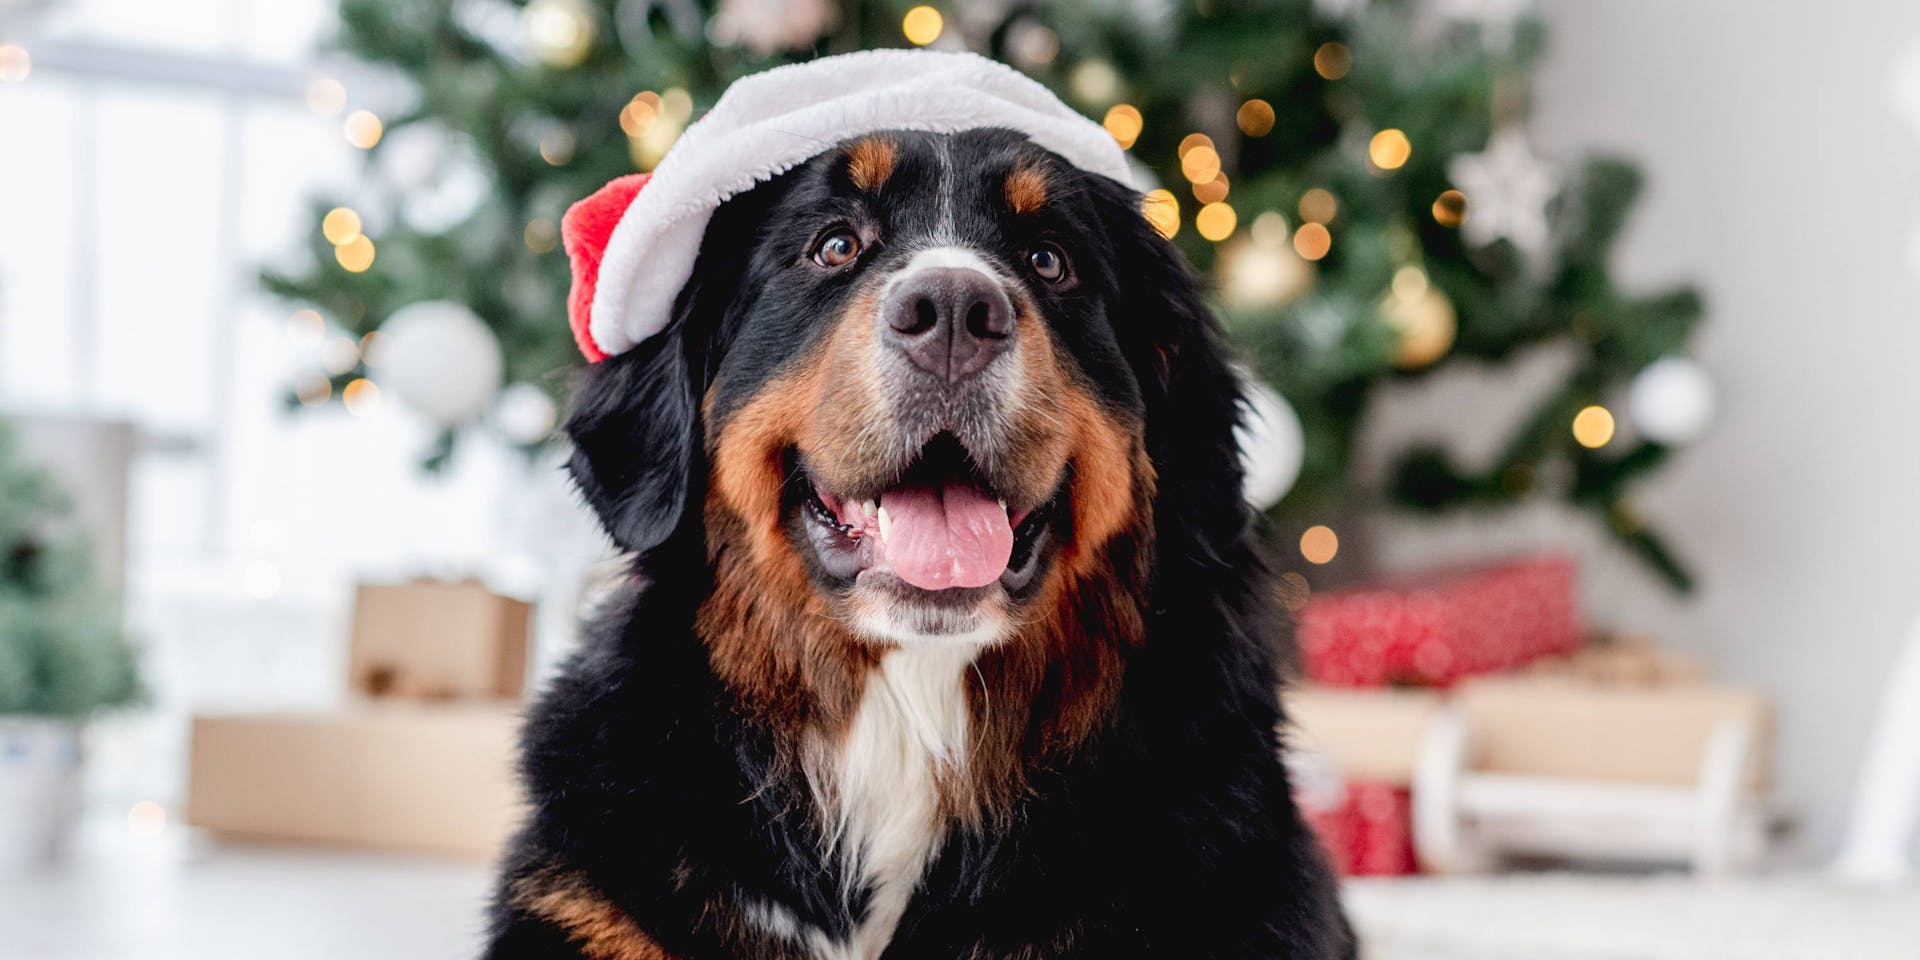 Dog with with Christmas hat and tree in background